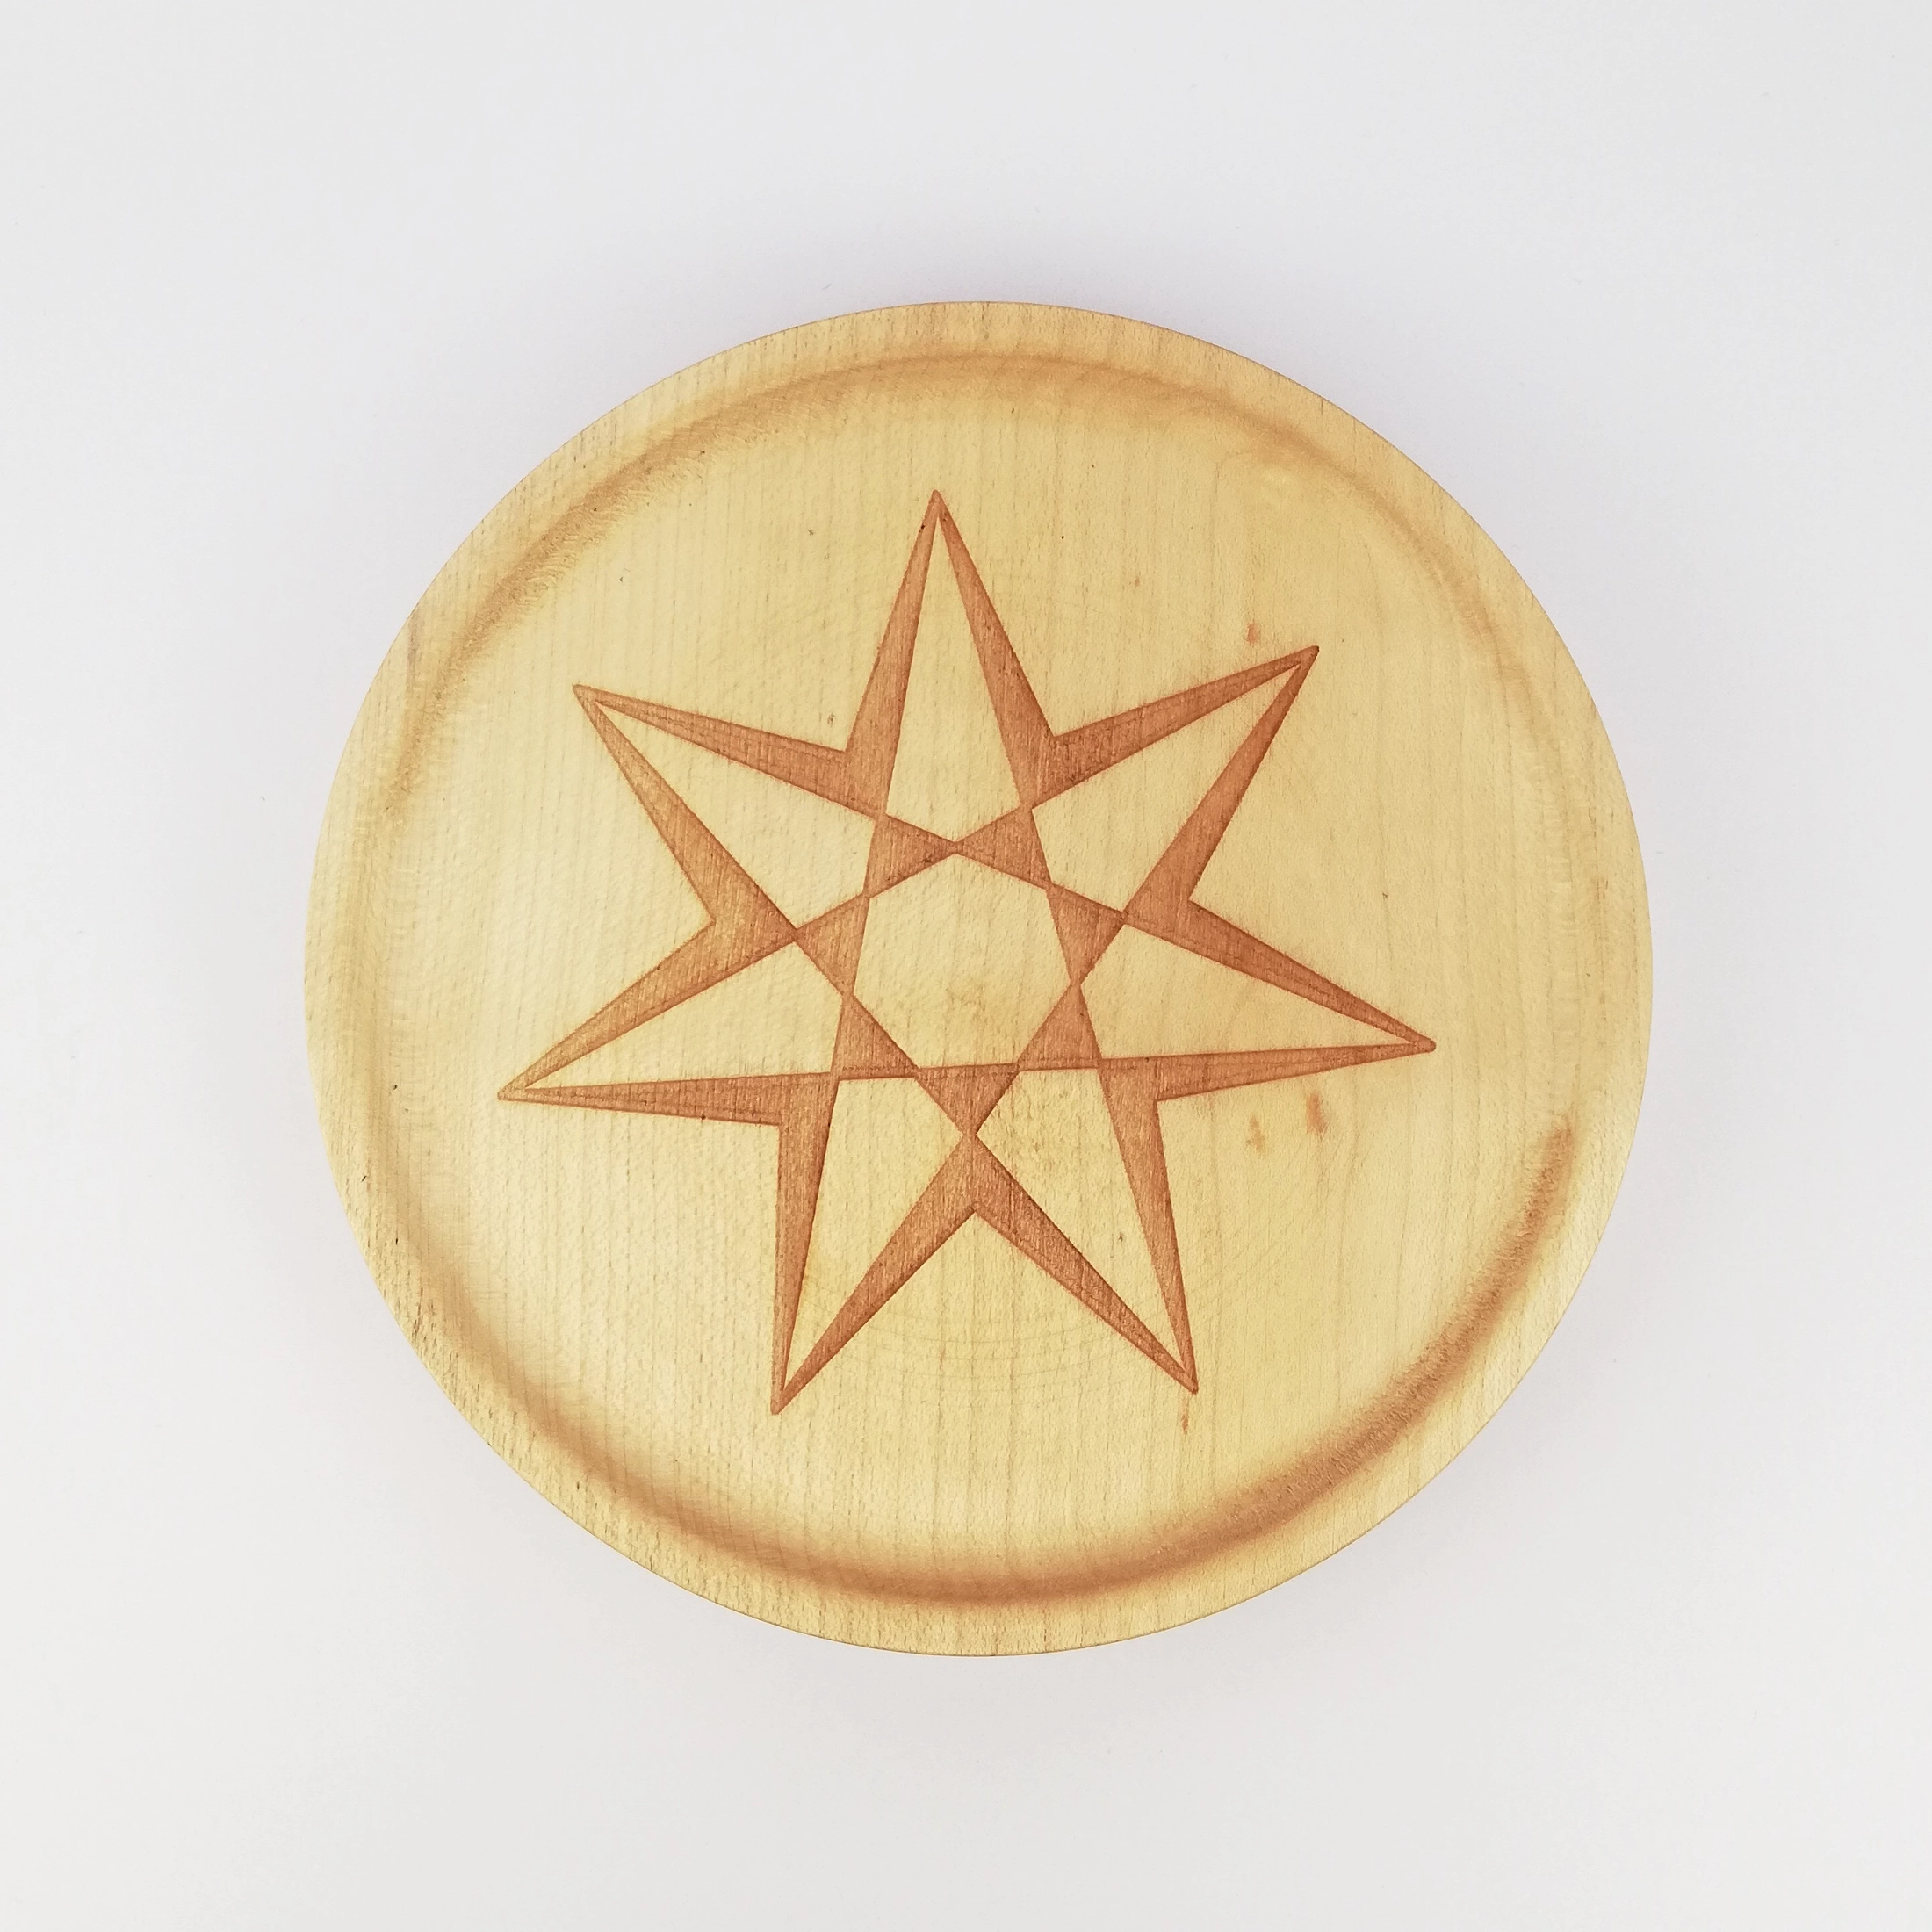 Heptagram on a small plate (16cm/6.3in in diameter), front.